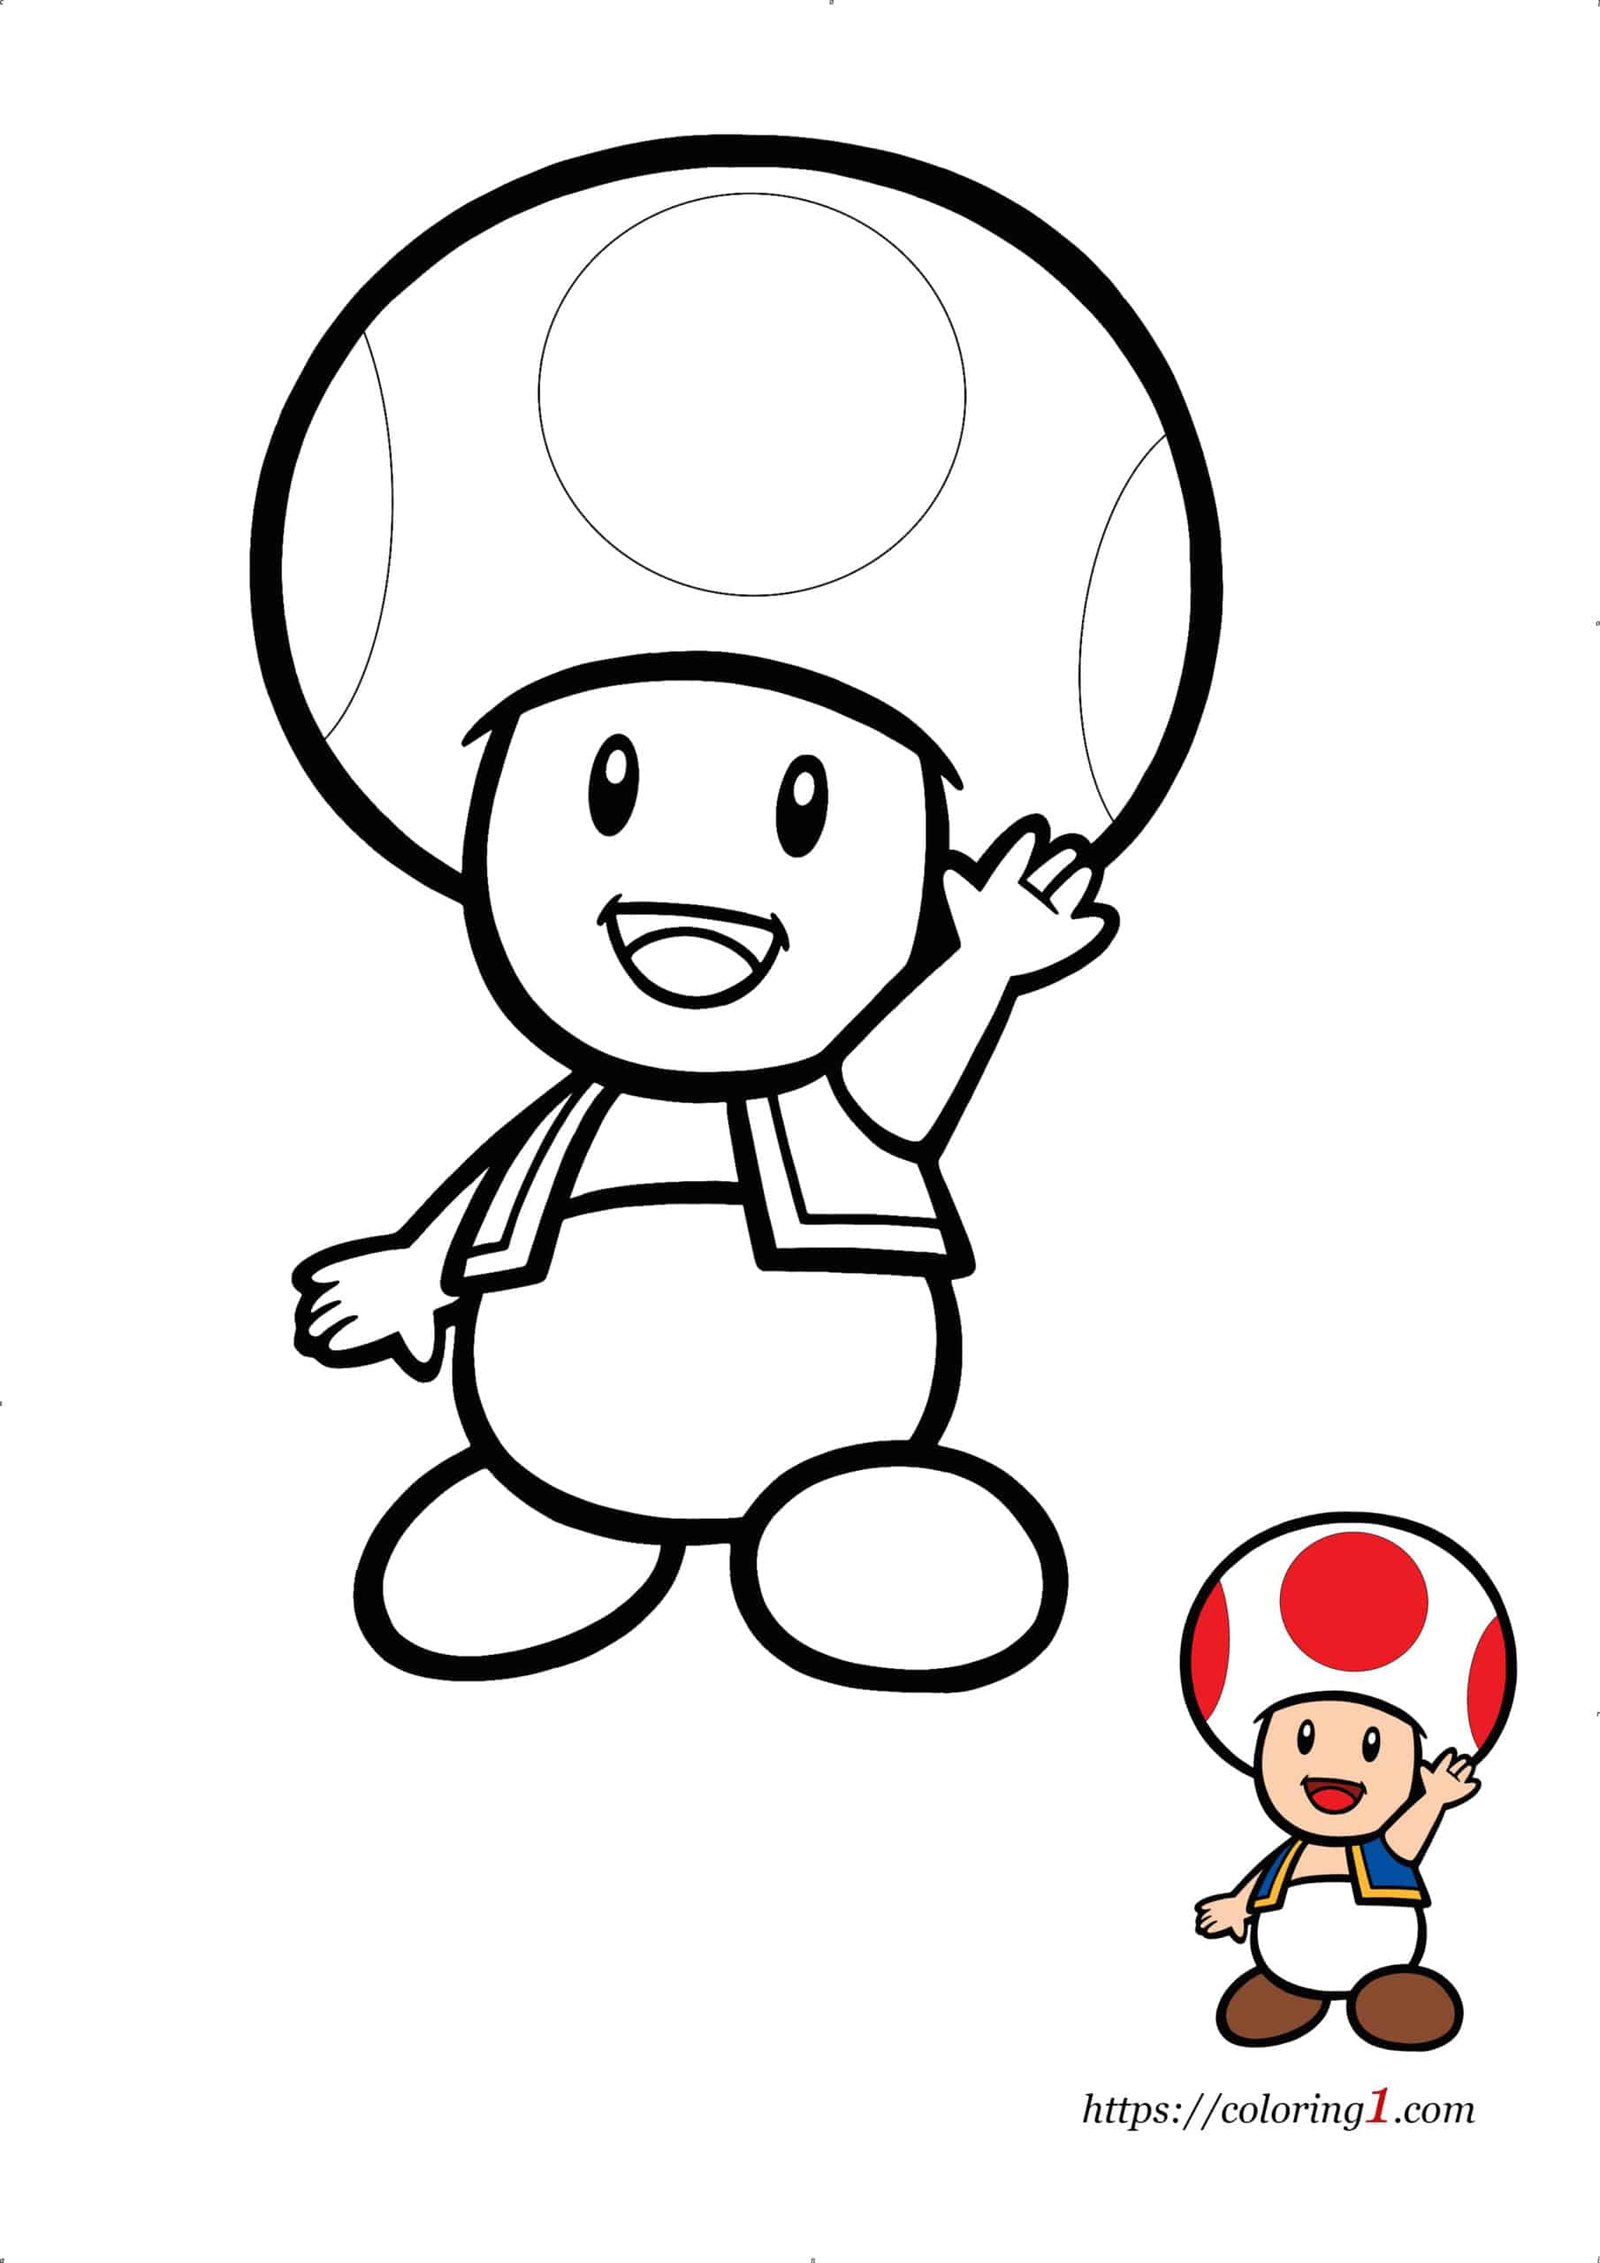 Toad Mario free printable coloring page for kids